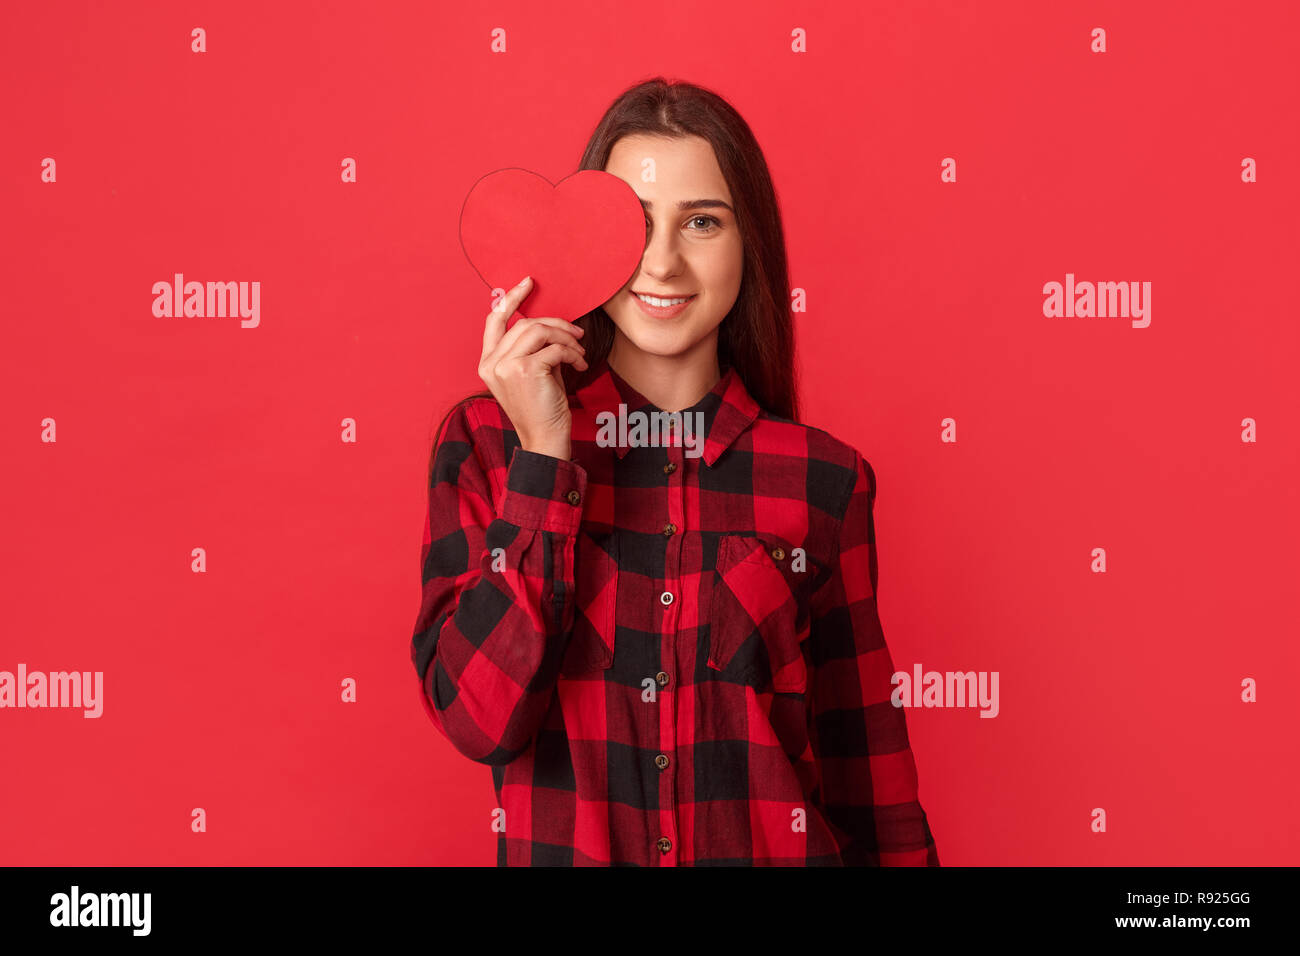 Young girl wearing shirt studio standing isolated on red wall covering ...